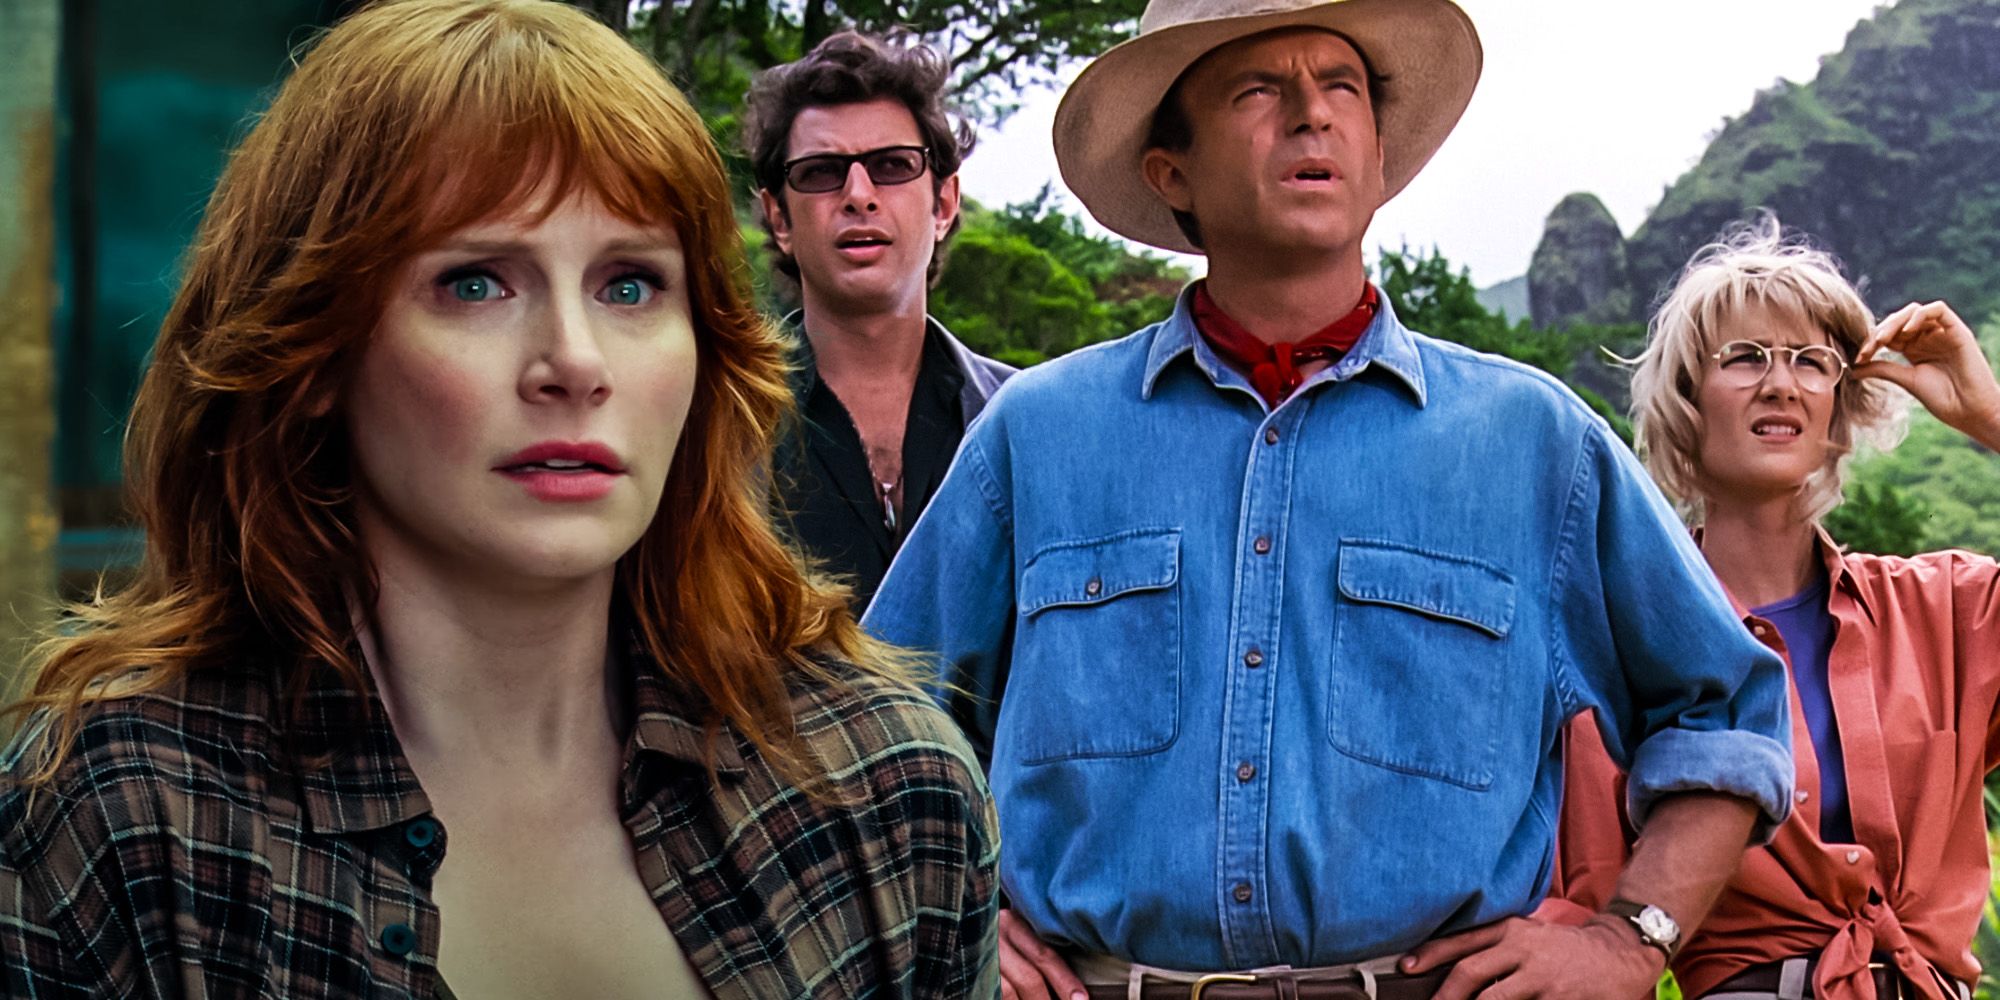 jurassic park and world movies are all box office hits despite bad reviews